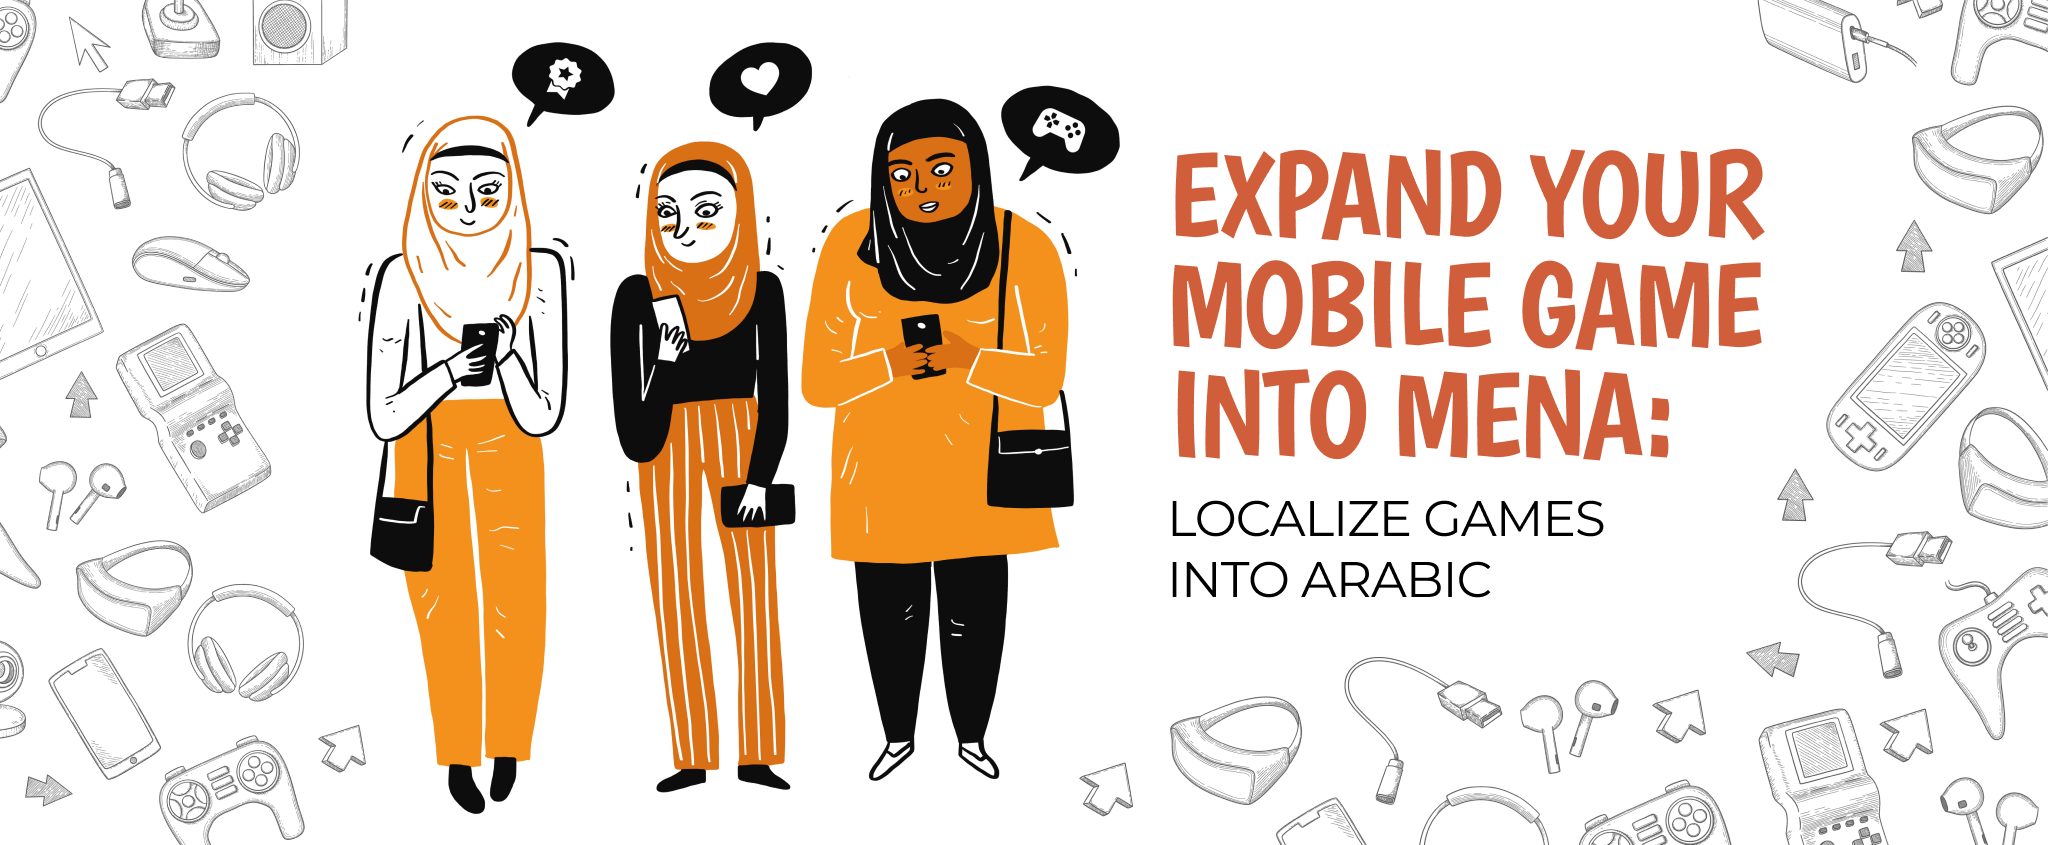 Expand Your Mobile Game Into MENA - Localize Games Into Arabic